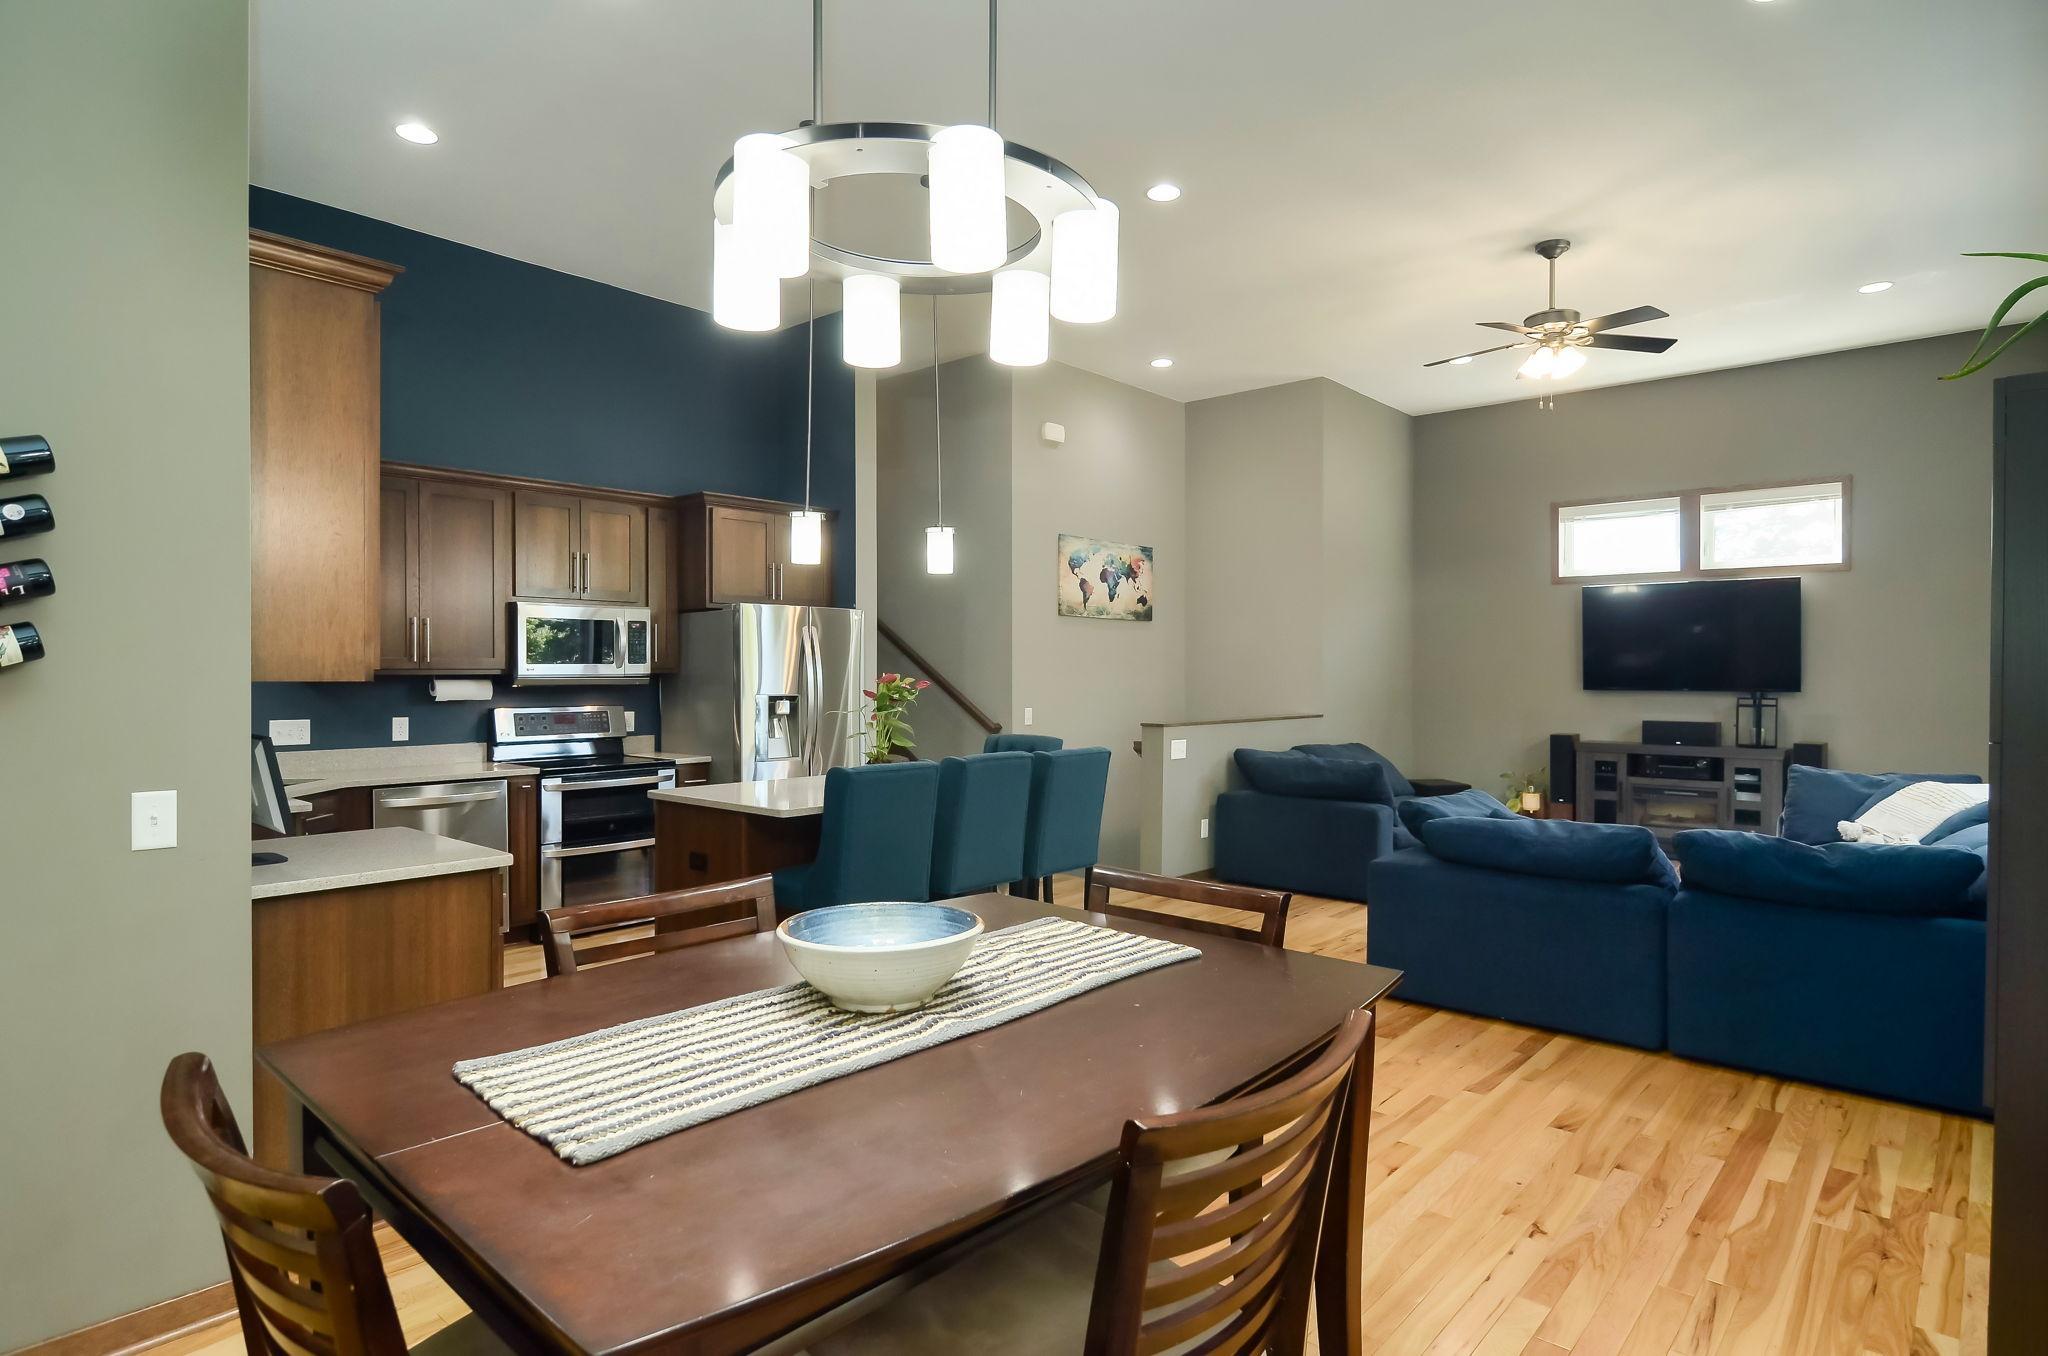 Open floorplan creates togetherness at meals and relaxing times.